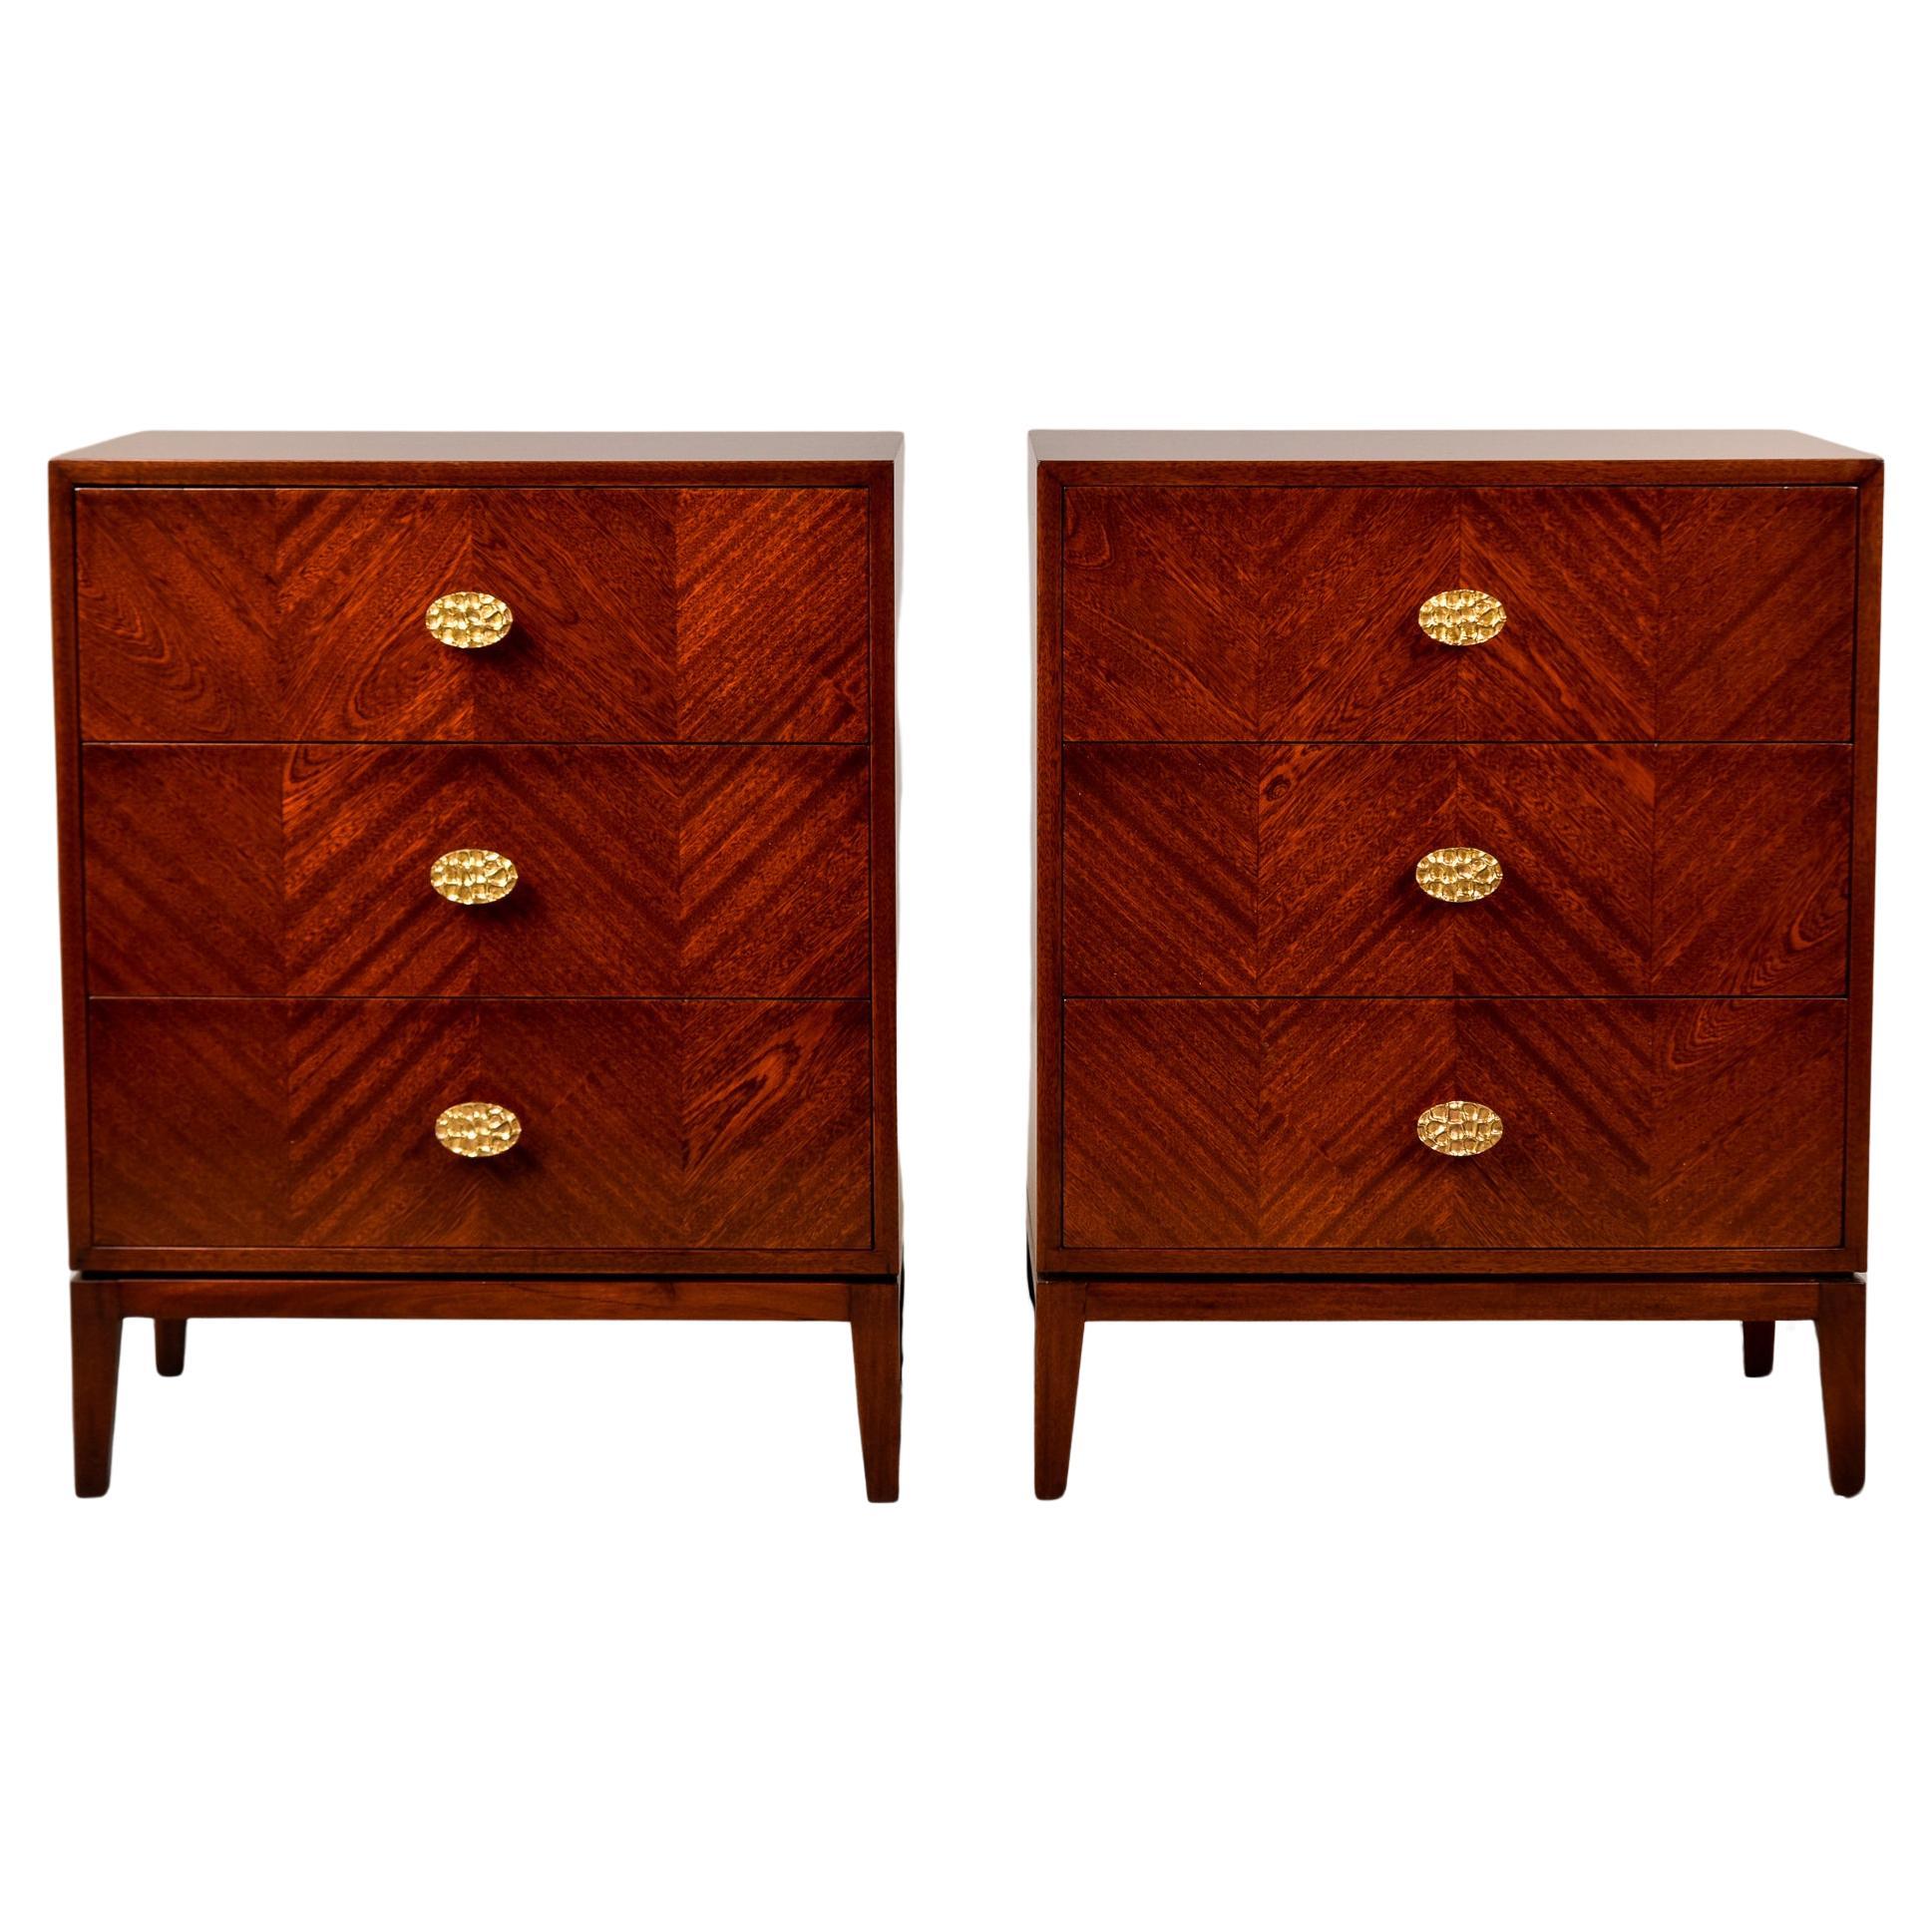 Pair Bespoke Three Drawer Walnut Chests with Brass Hardware For Sale